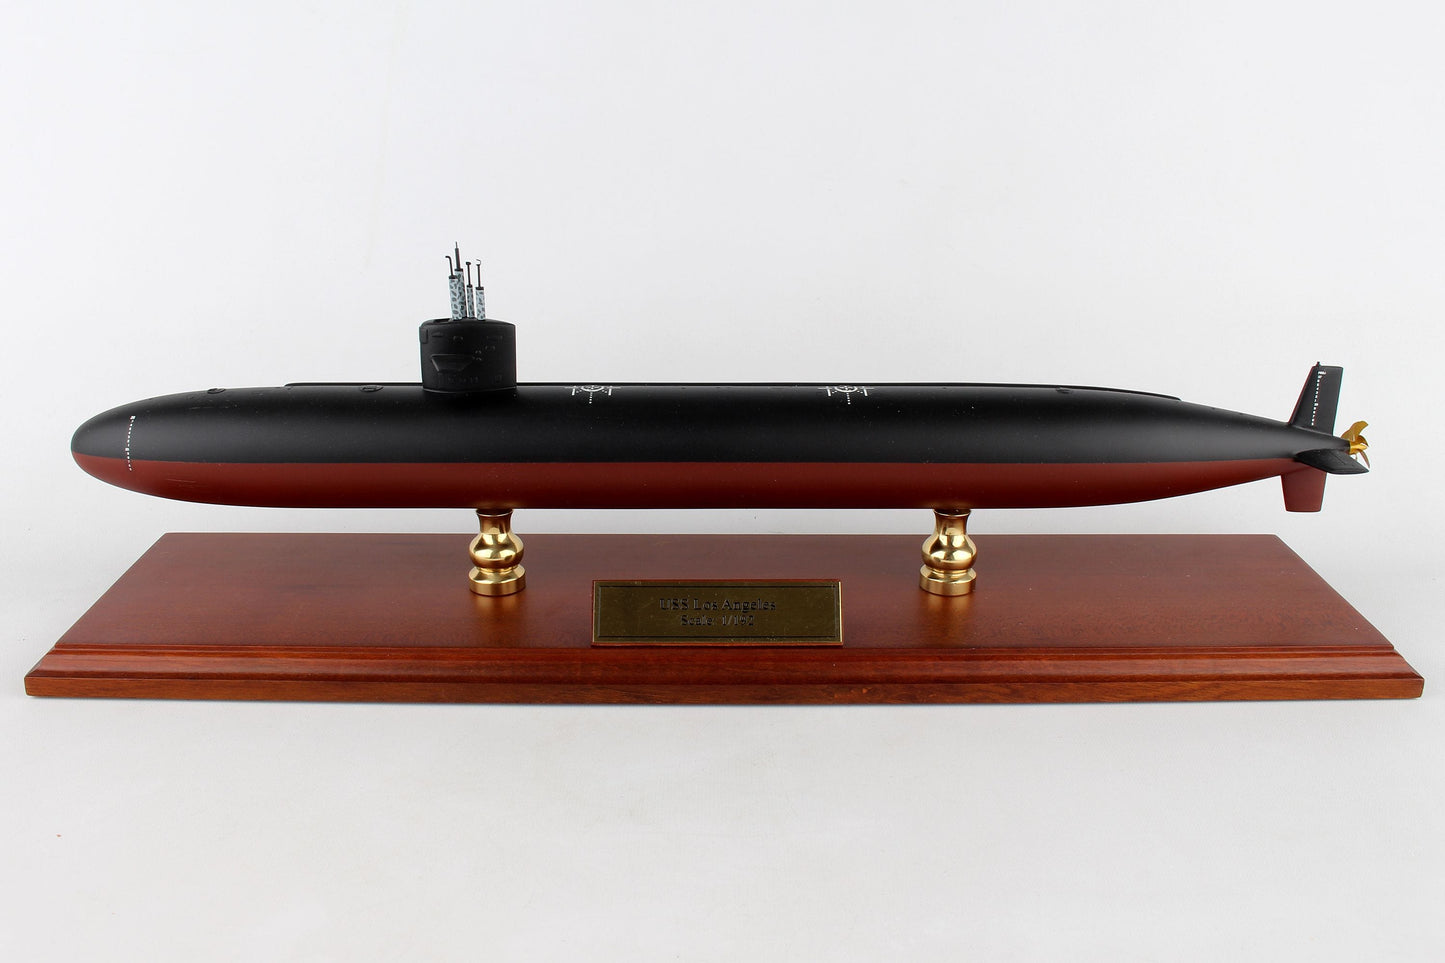 ALDO Creative Arts Collectibles Scale Model Length is 22" and beam is 2". Scale :1/192 / NEW / wod US Navy SSN Los Angeles Class  Nuclear-Powered Fast Attack Submarine  Model Assembled